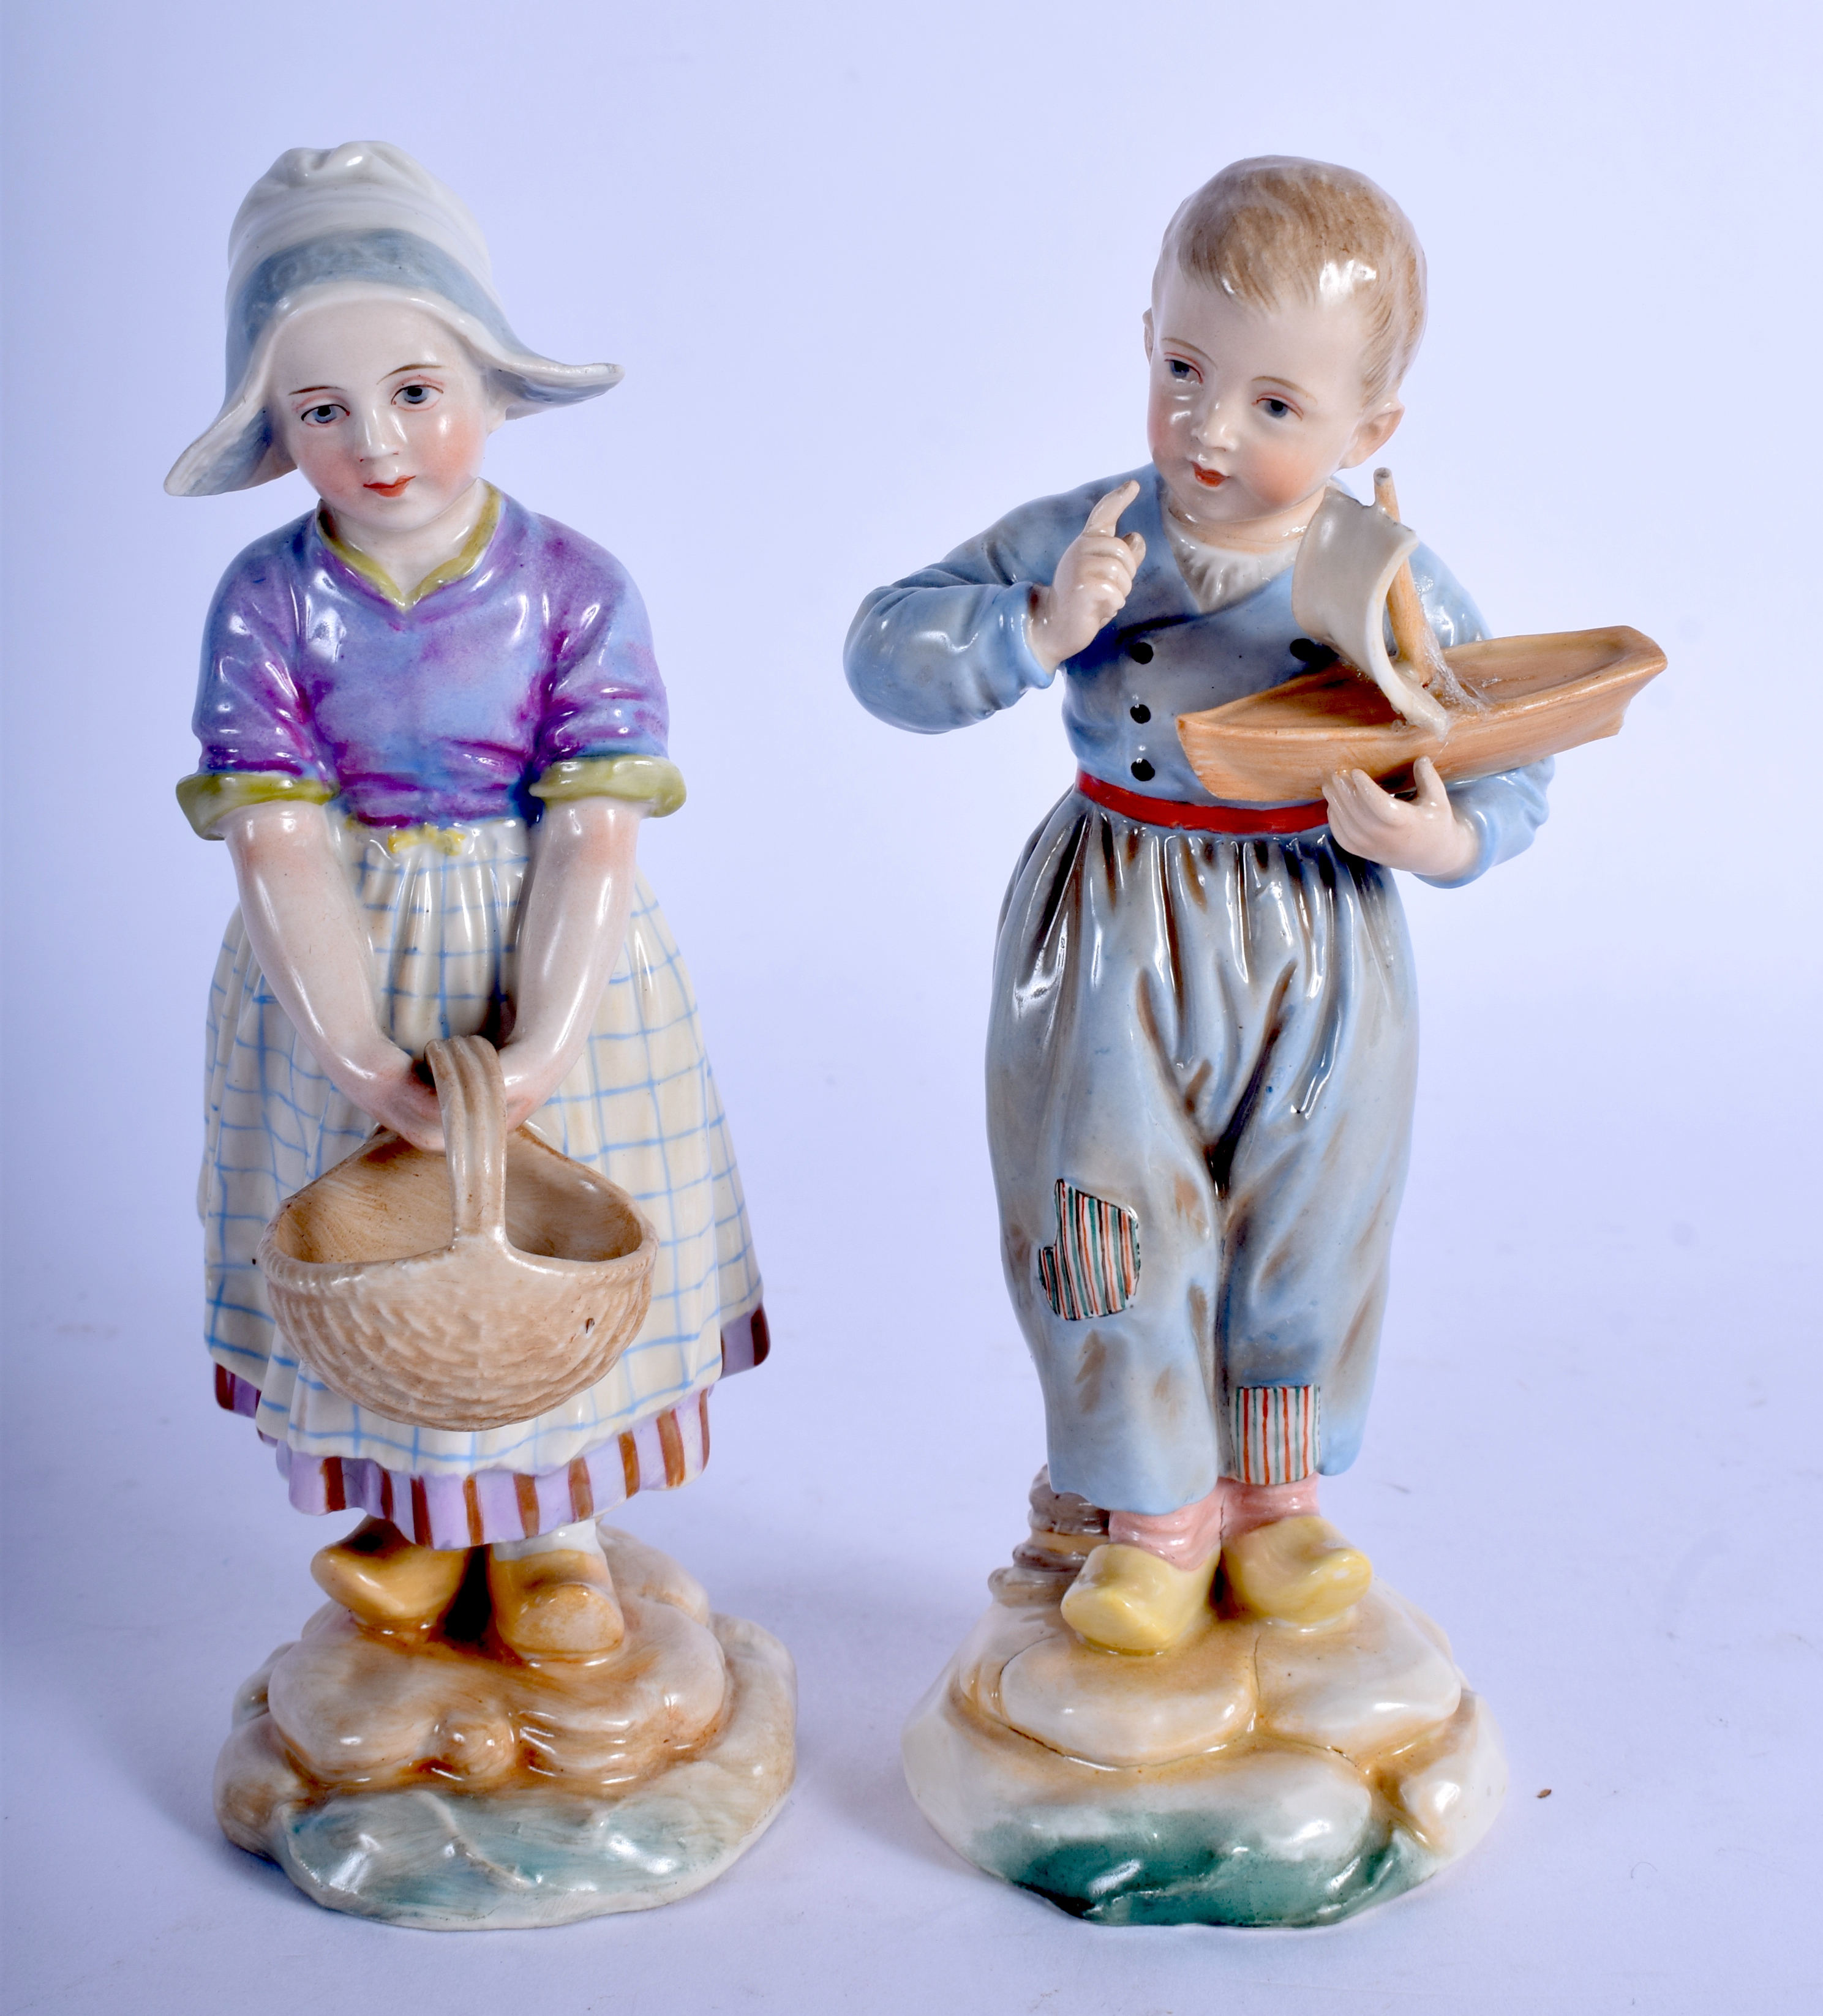 A PAIR OF 19TH CENTURY GERMAN PORCELAIN FIGURES possibly Hoscht, one holding a toy boat. 15 cm high.